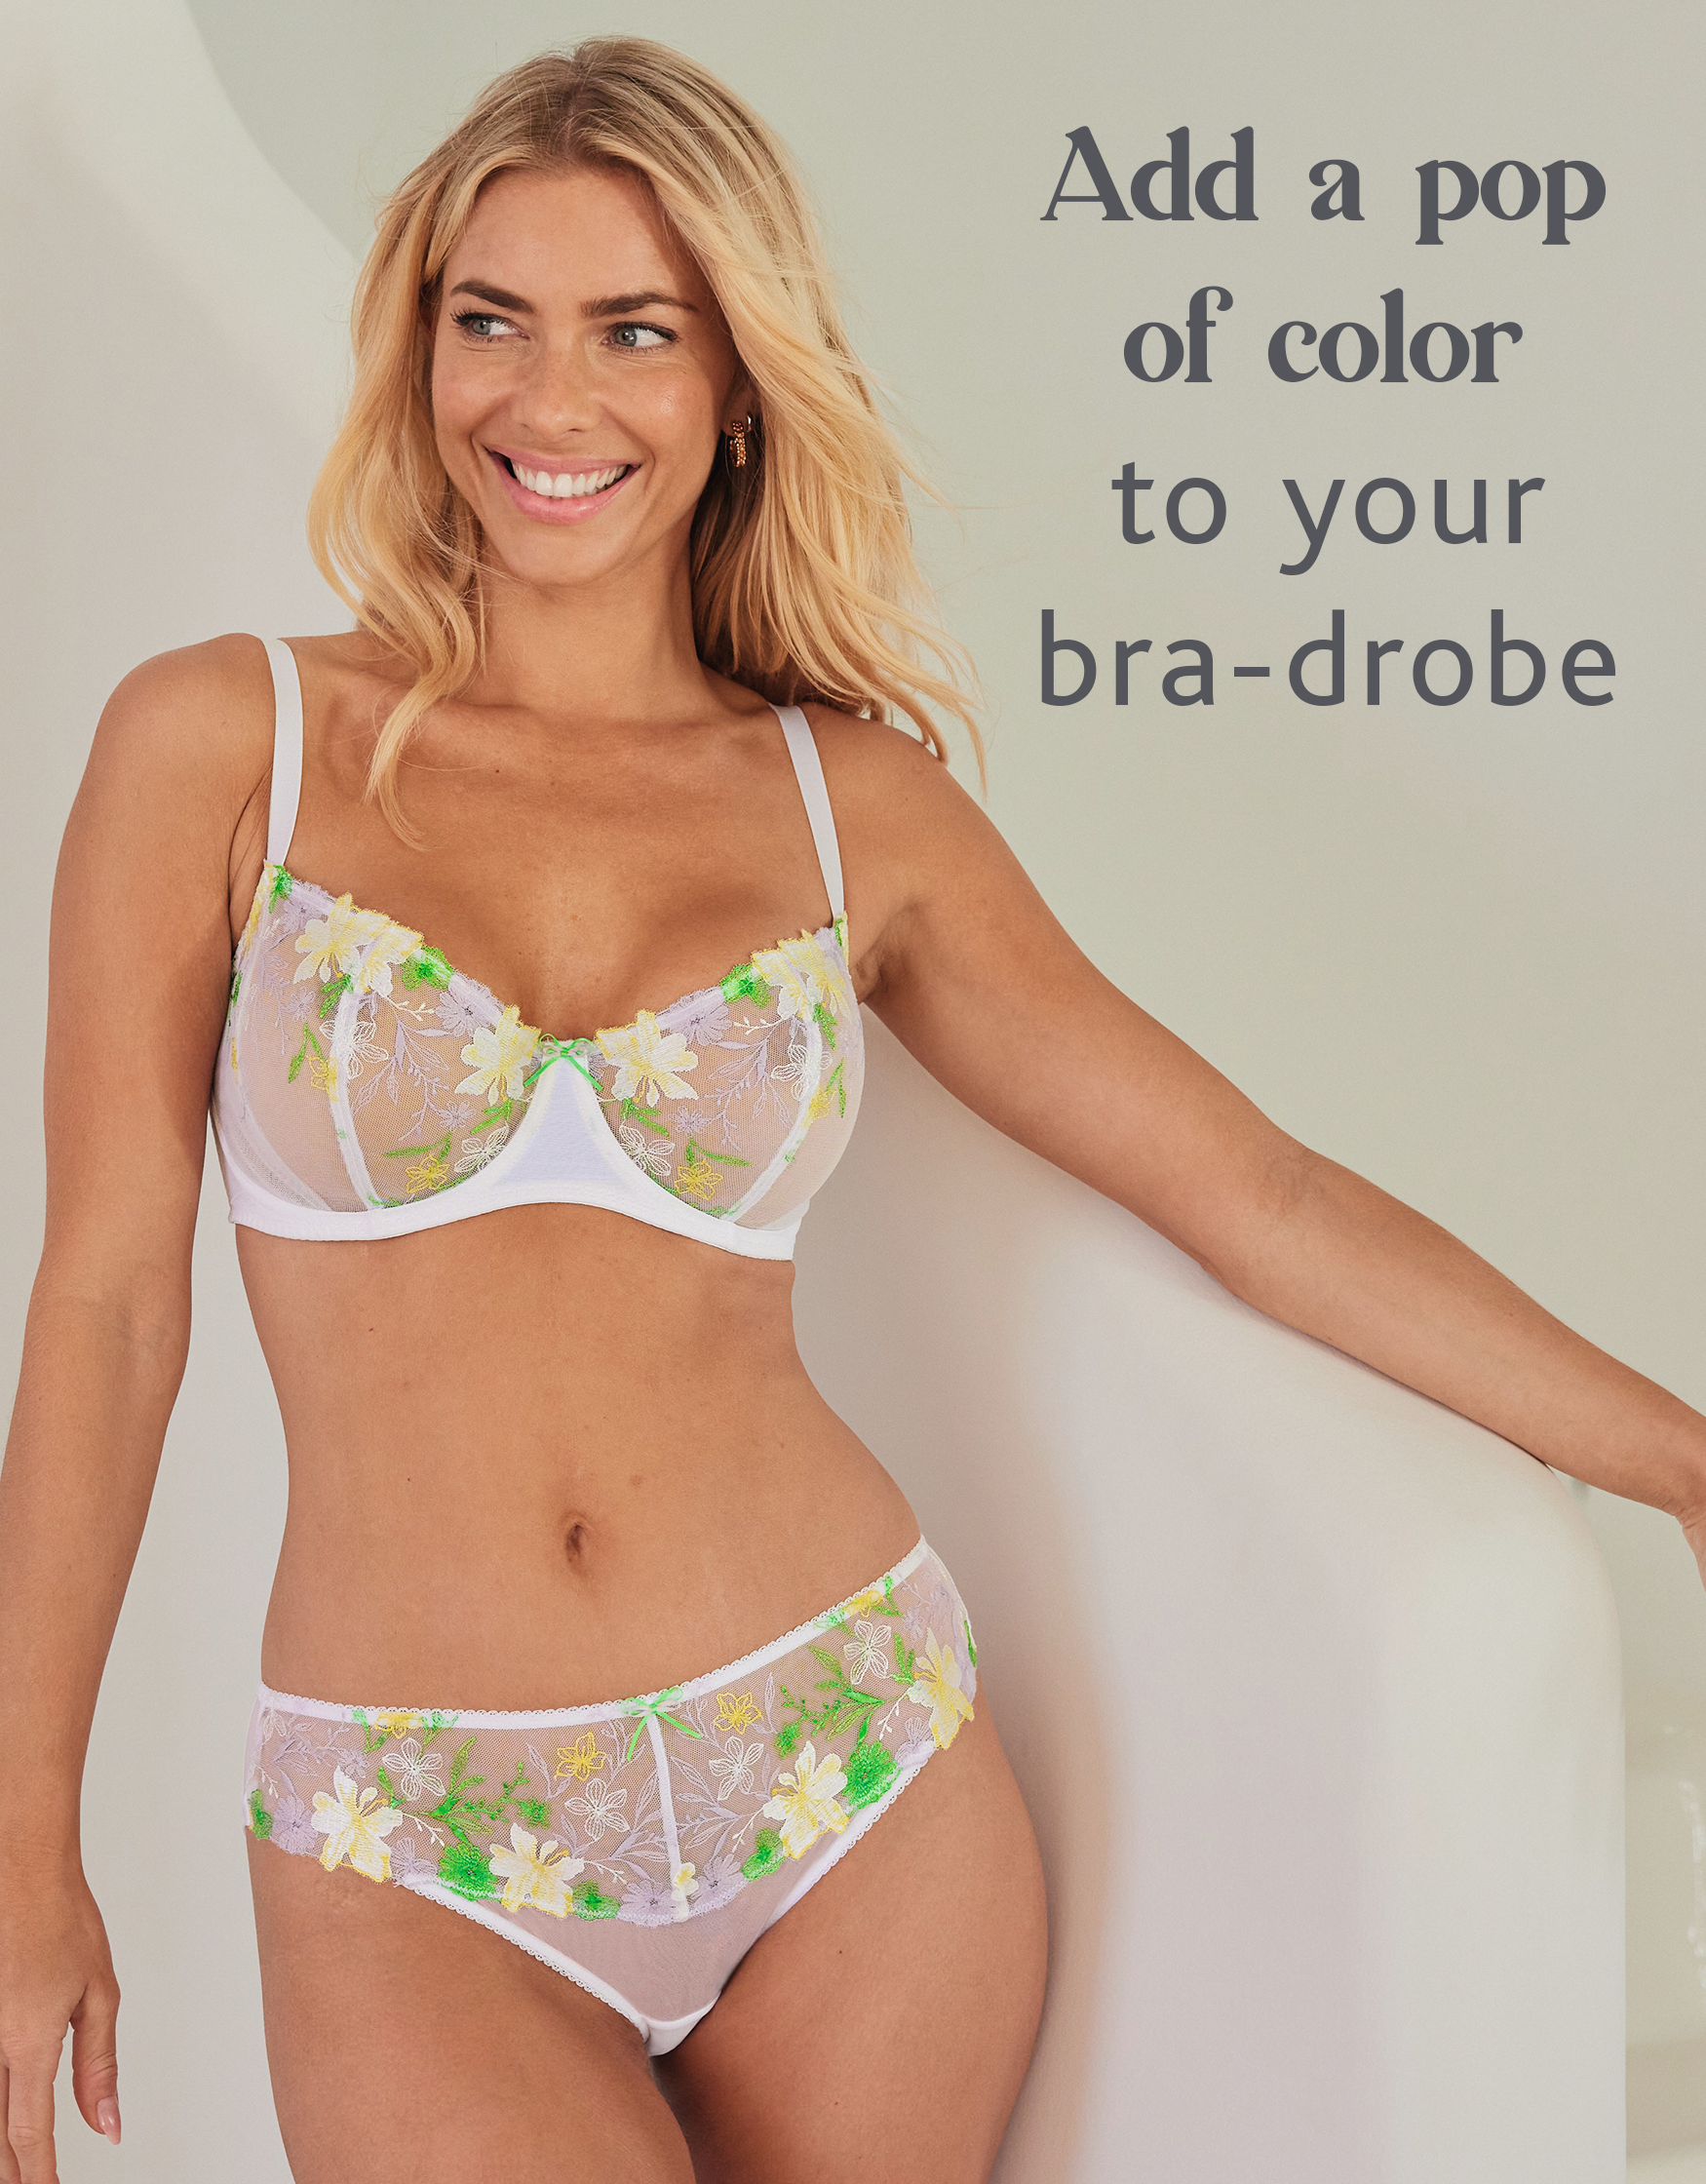 Bravissimo now offer virtual bra fittings to help customers at